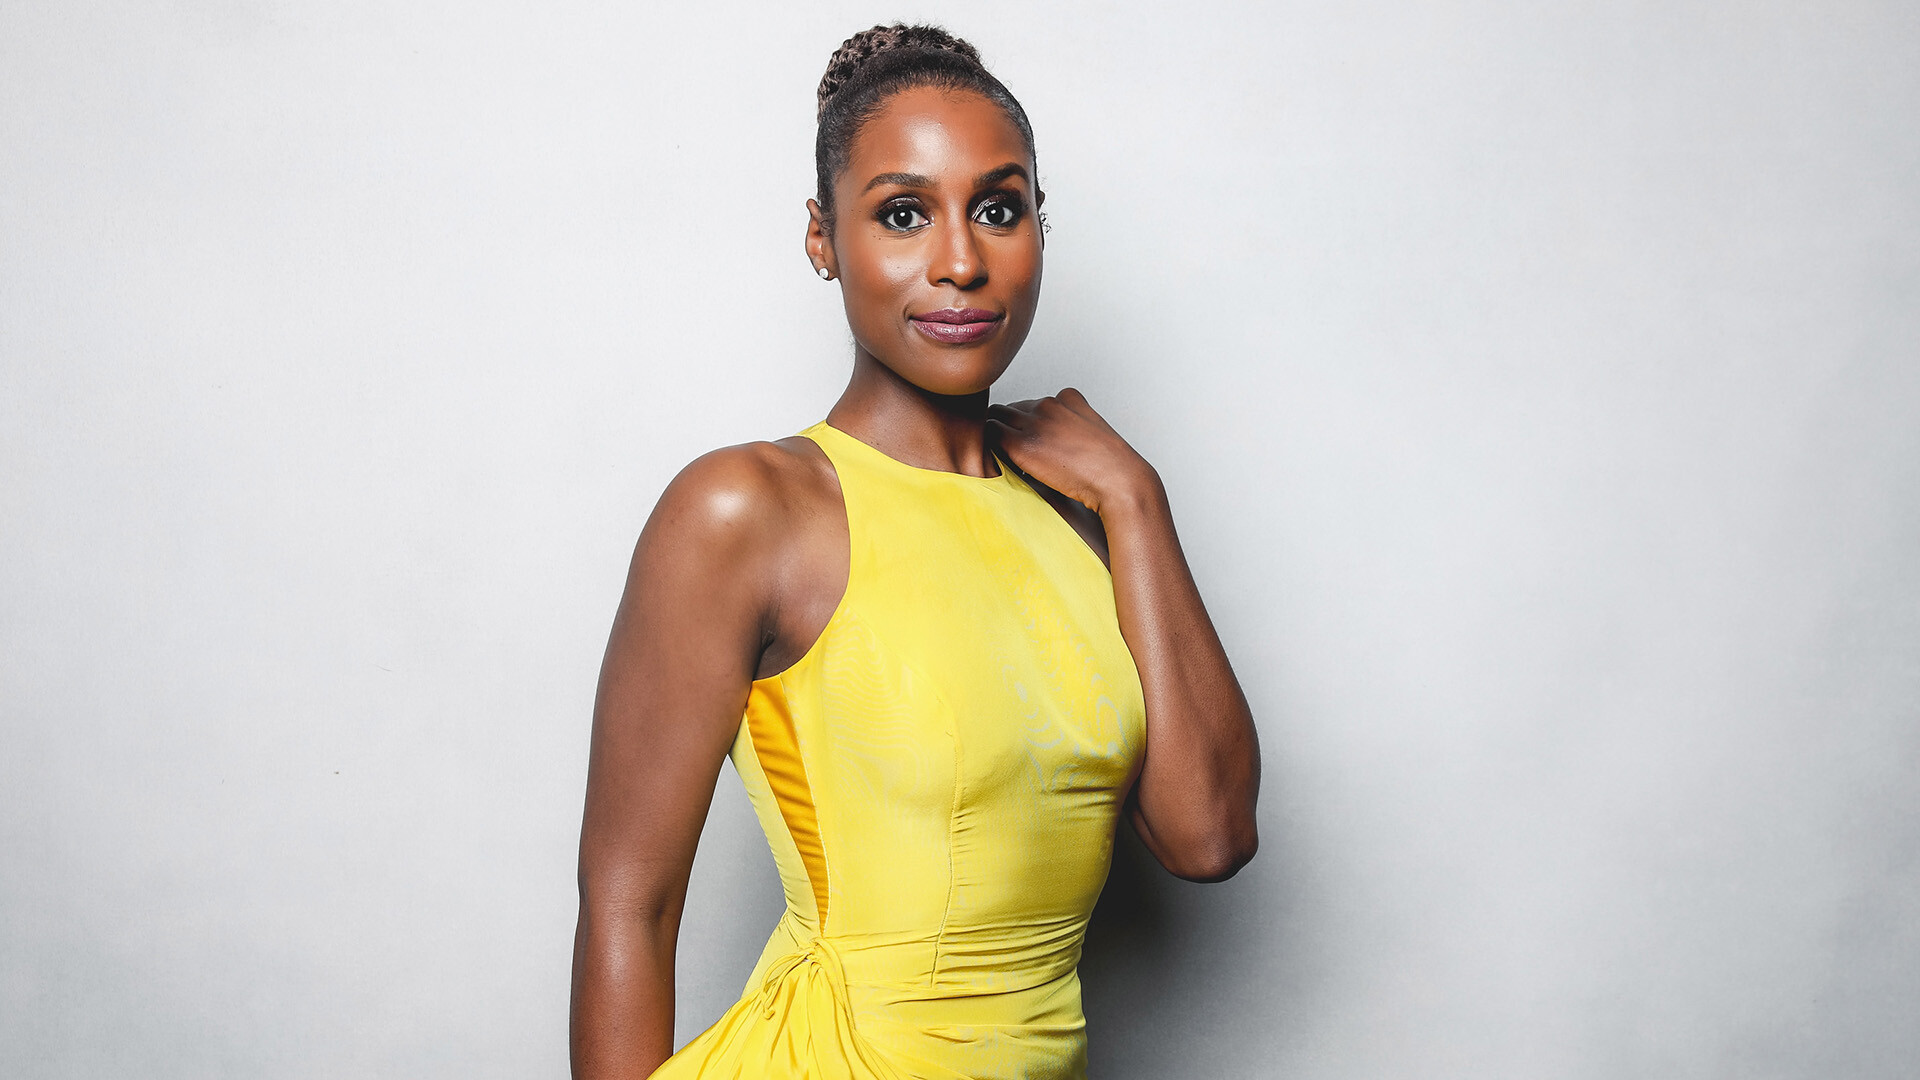 Issa Rae: An American performer who played the role of April Ofrah in 2018 movie The Hate U Give. 1920x1080 Full HD Background.